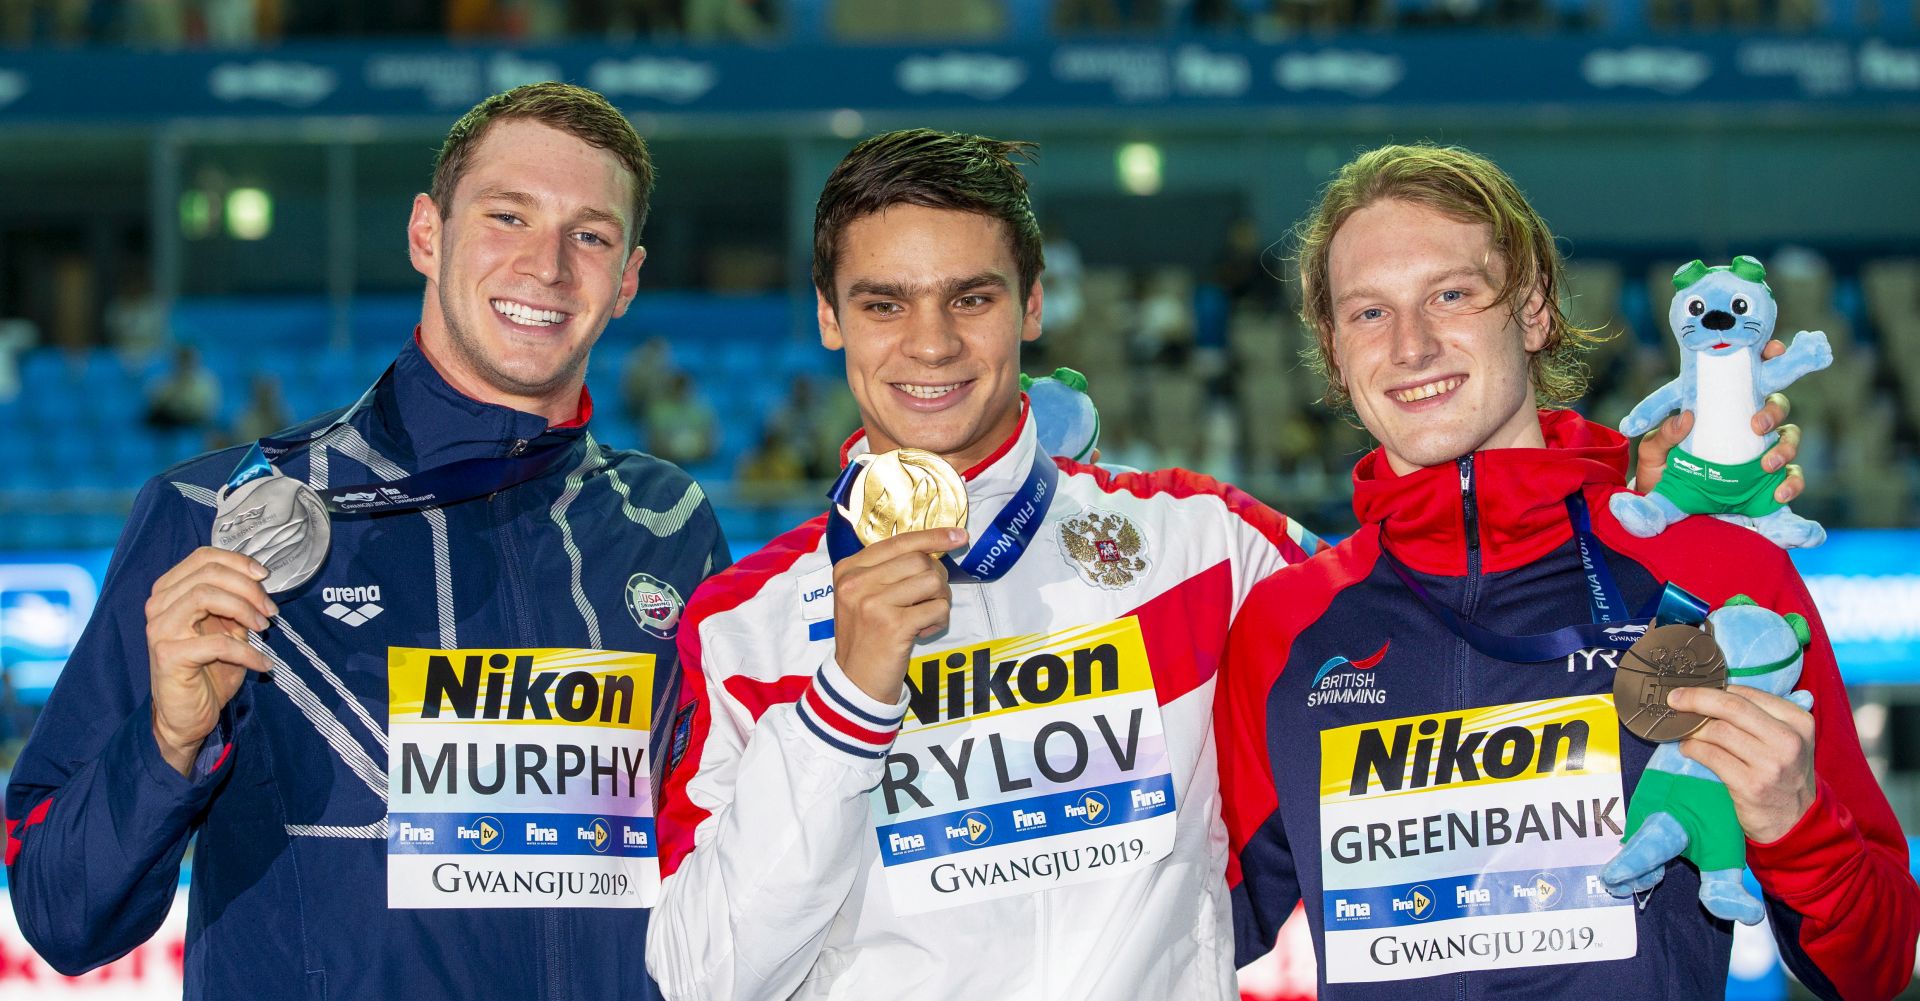 epa07742134 (L-R) Second placed Ryan Murphy of the USA, winner Evgeny Rylov of Russia, and third placed Luke Greenbank of Britain pose with their medals after the medal ceremony for the men's 200m Backstroke final during the Swimming events at the Gwangju 2019 FINA World Championships in Gwangju, South Korea, 26 July 2019.  EPA/PATRICK B. KRAEMER